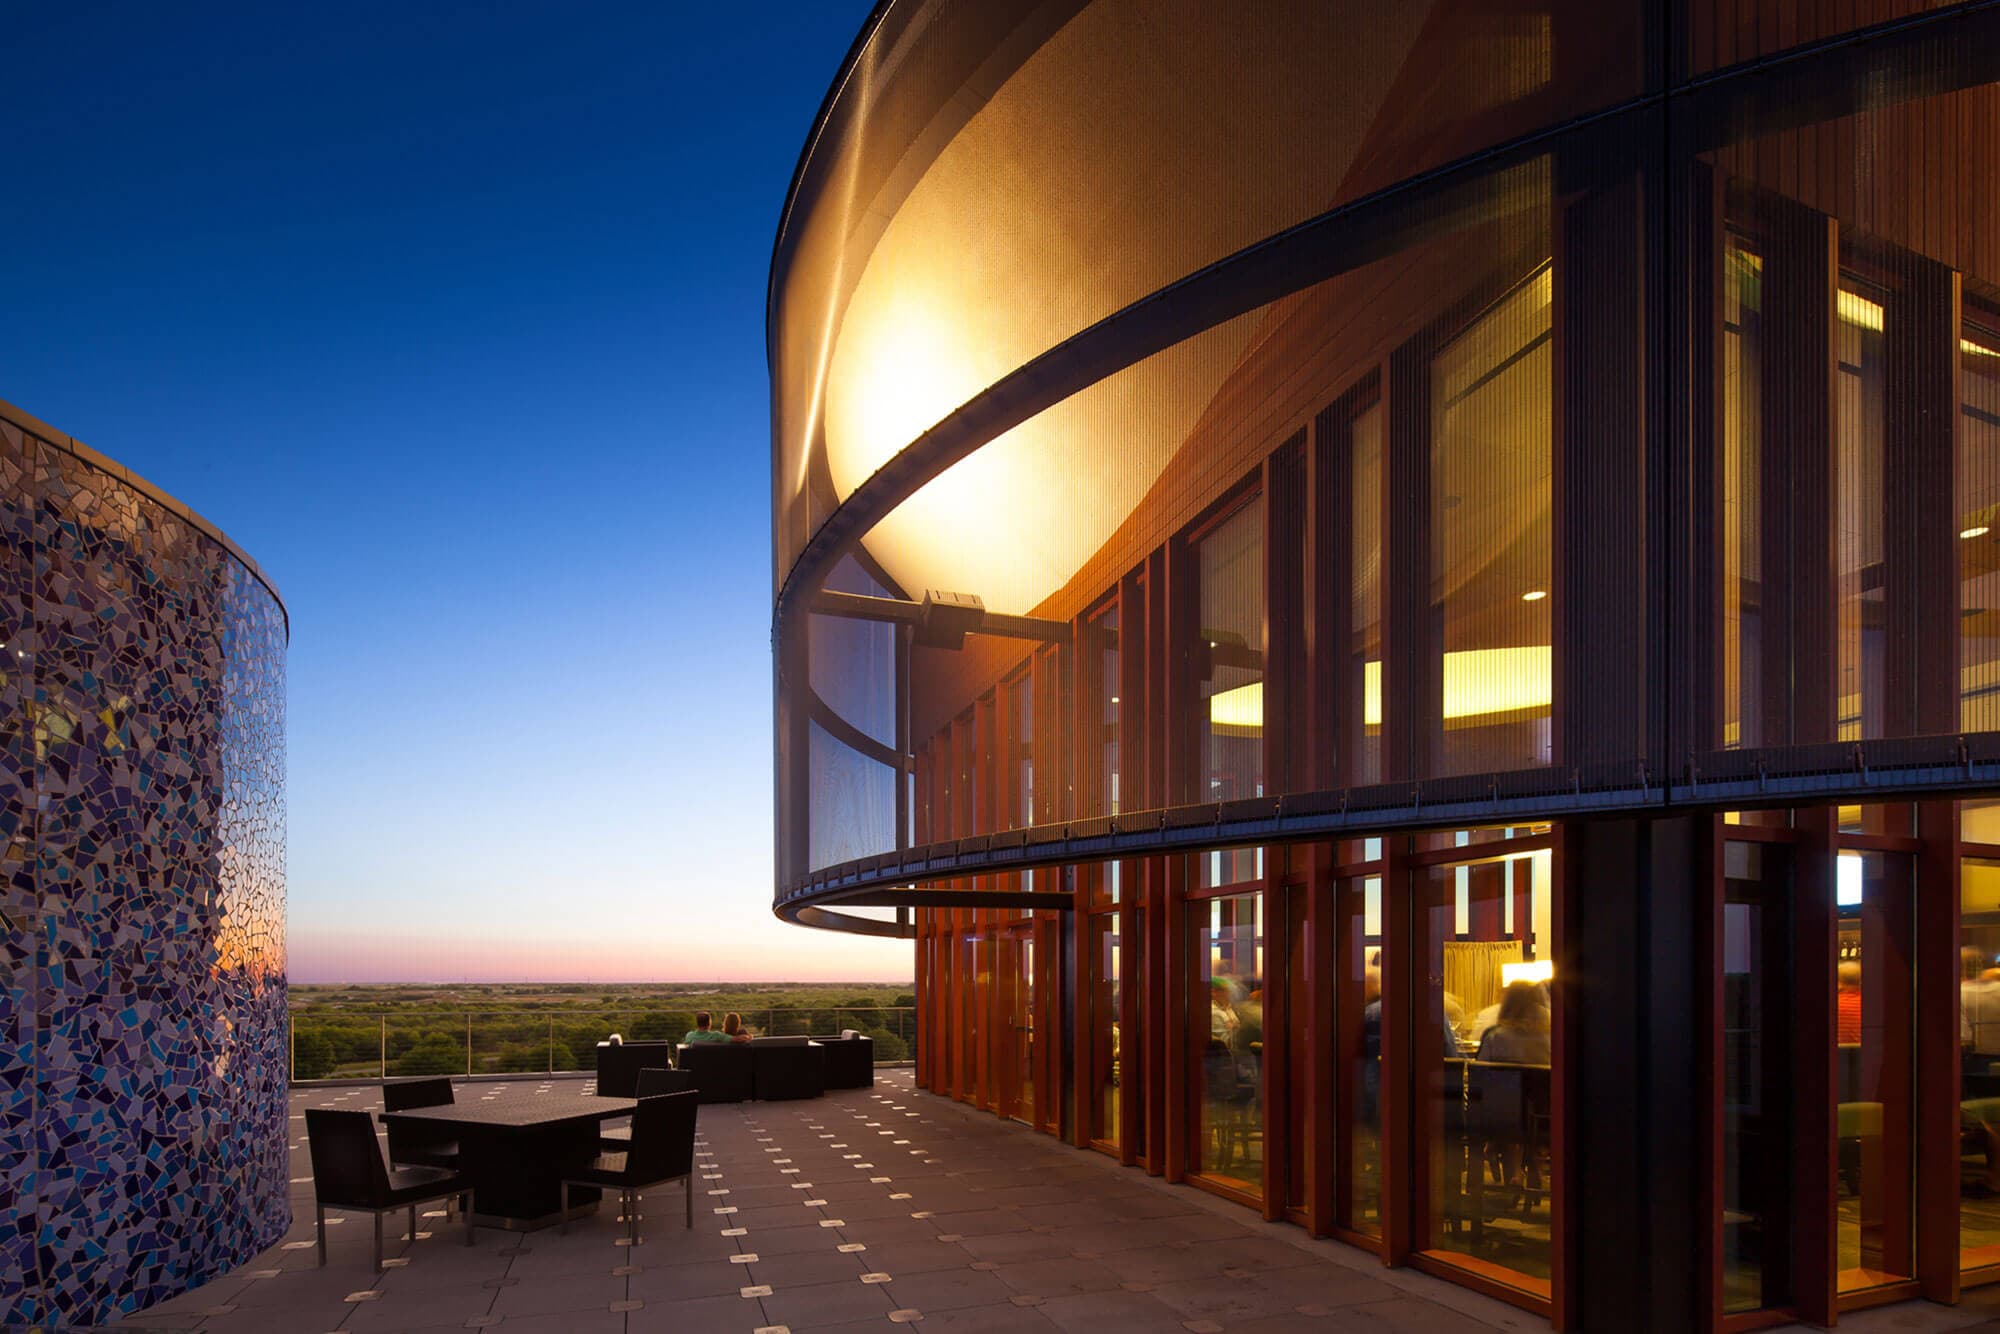 Terrace seating area during sunset at Fragmentary Blue at Streamsong Resort